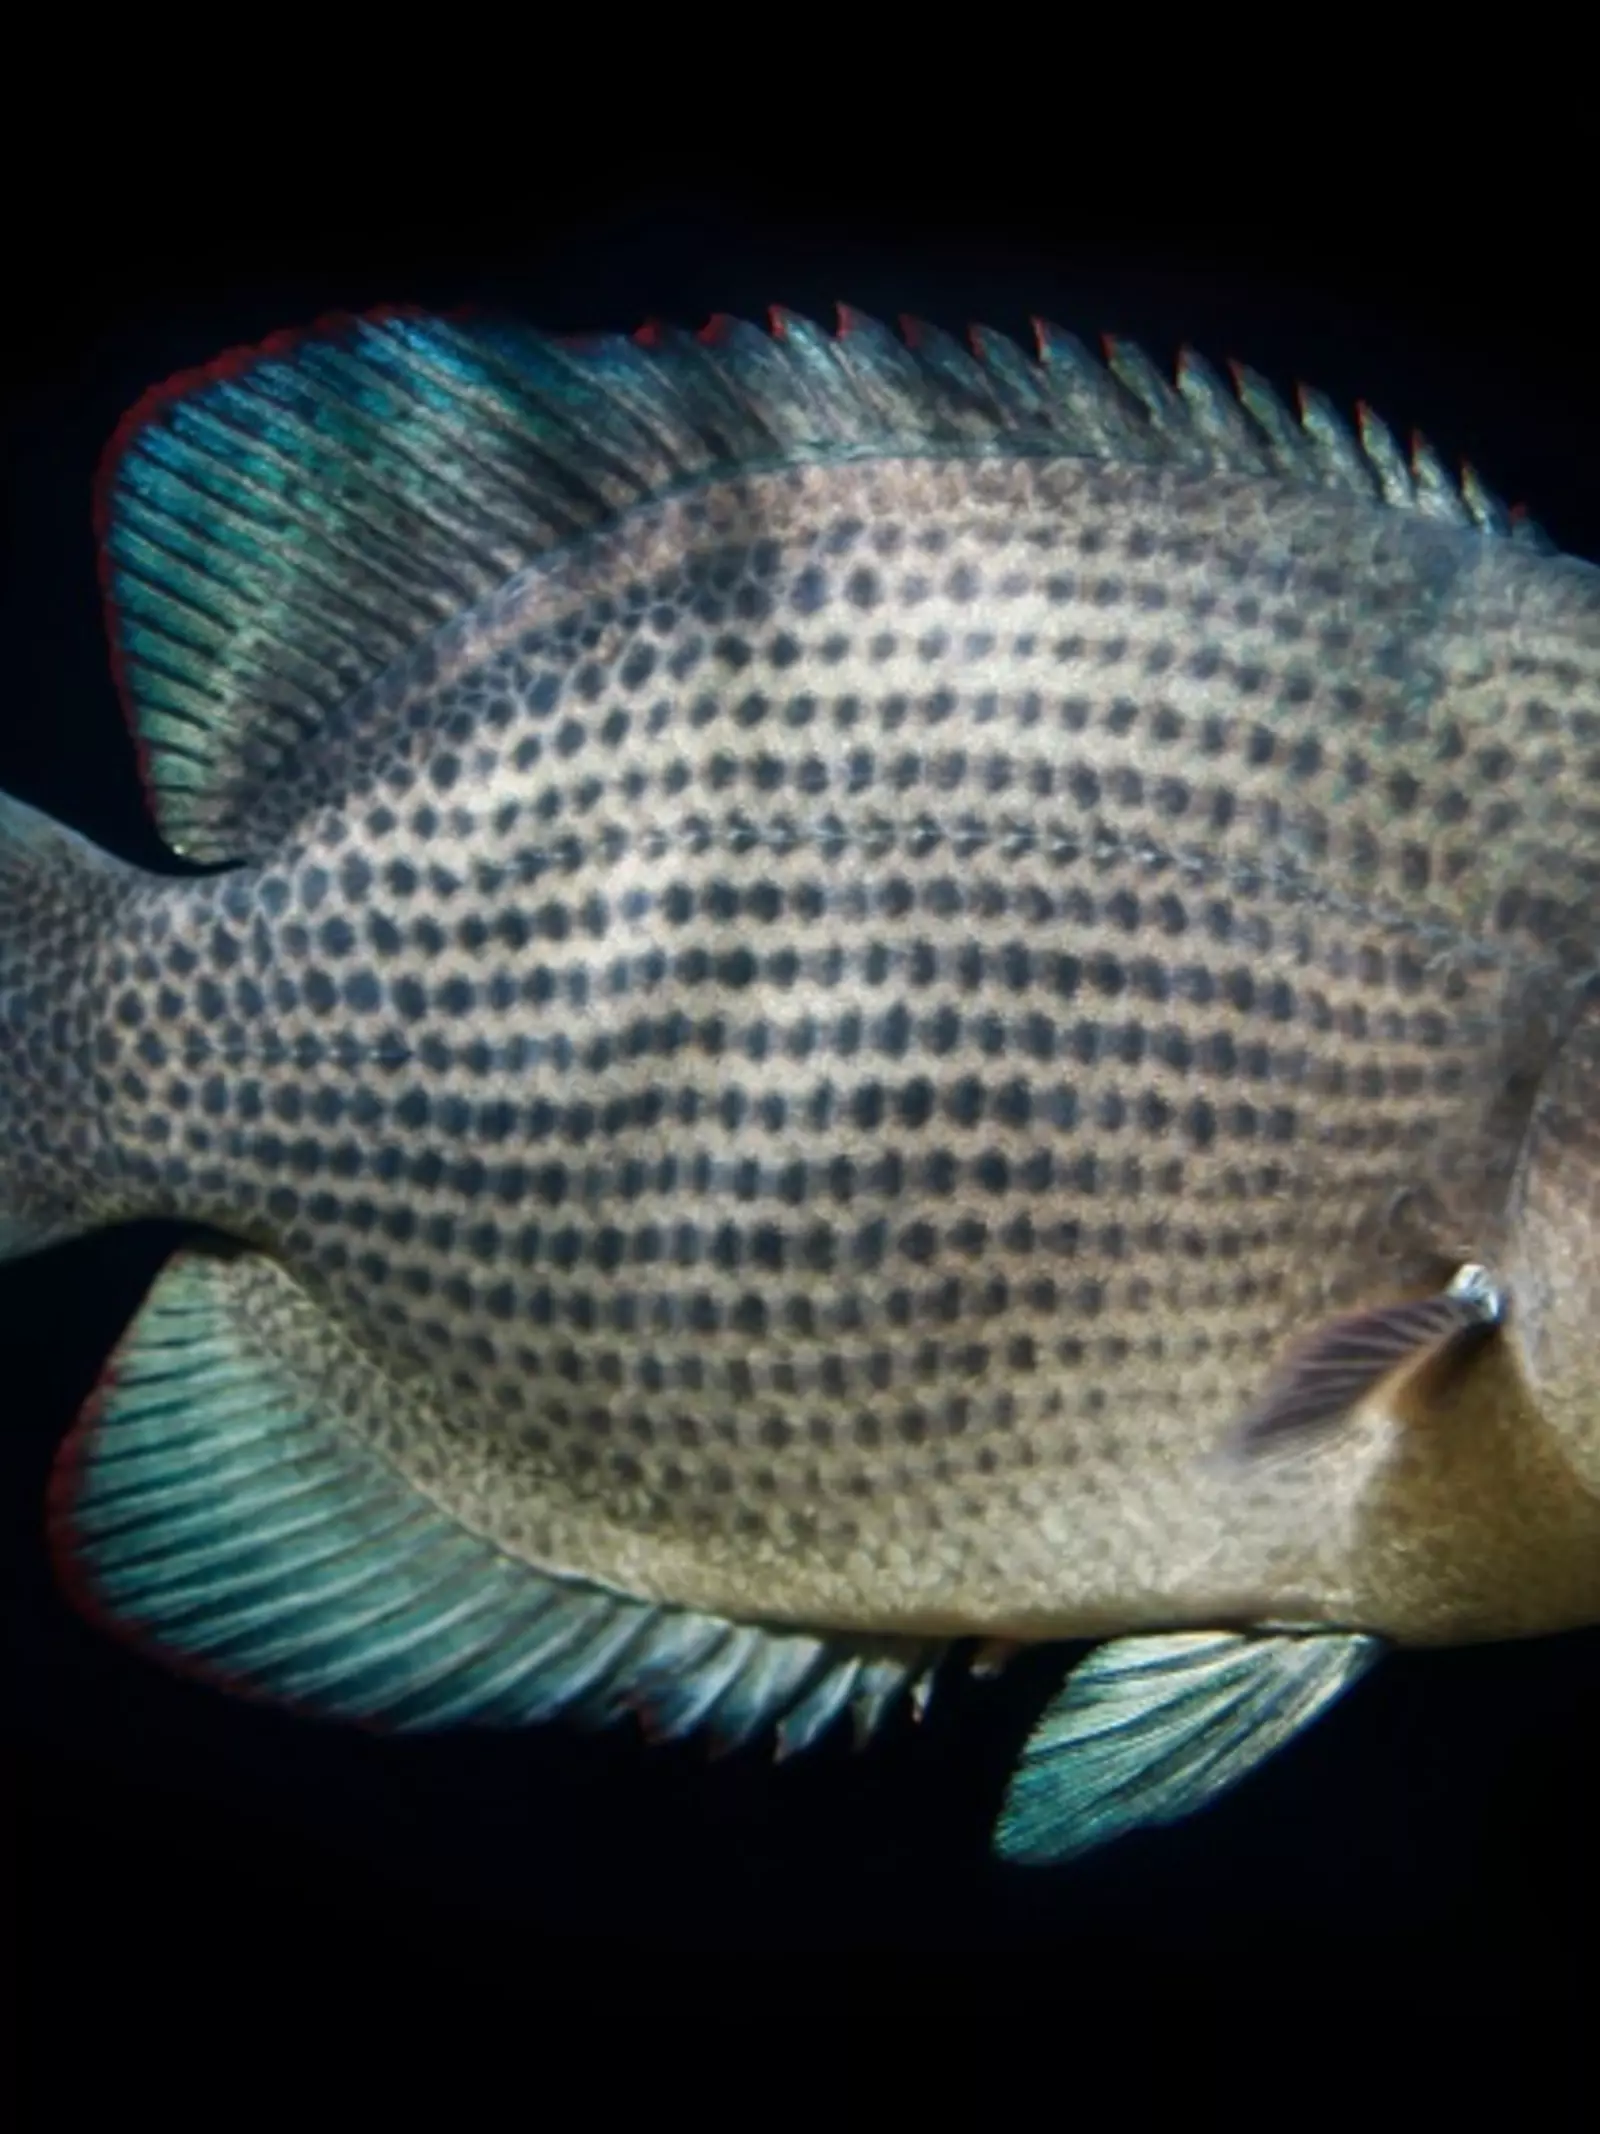 These Critically Endangered fish have special teeth that can crack through snail shells. 